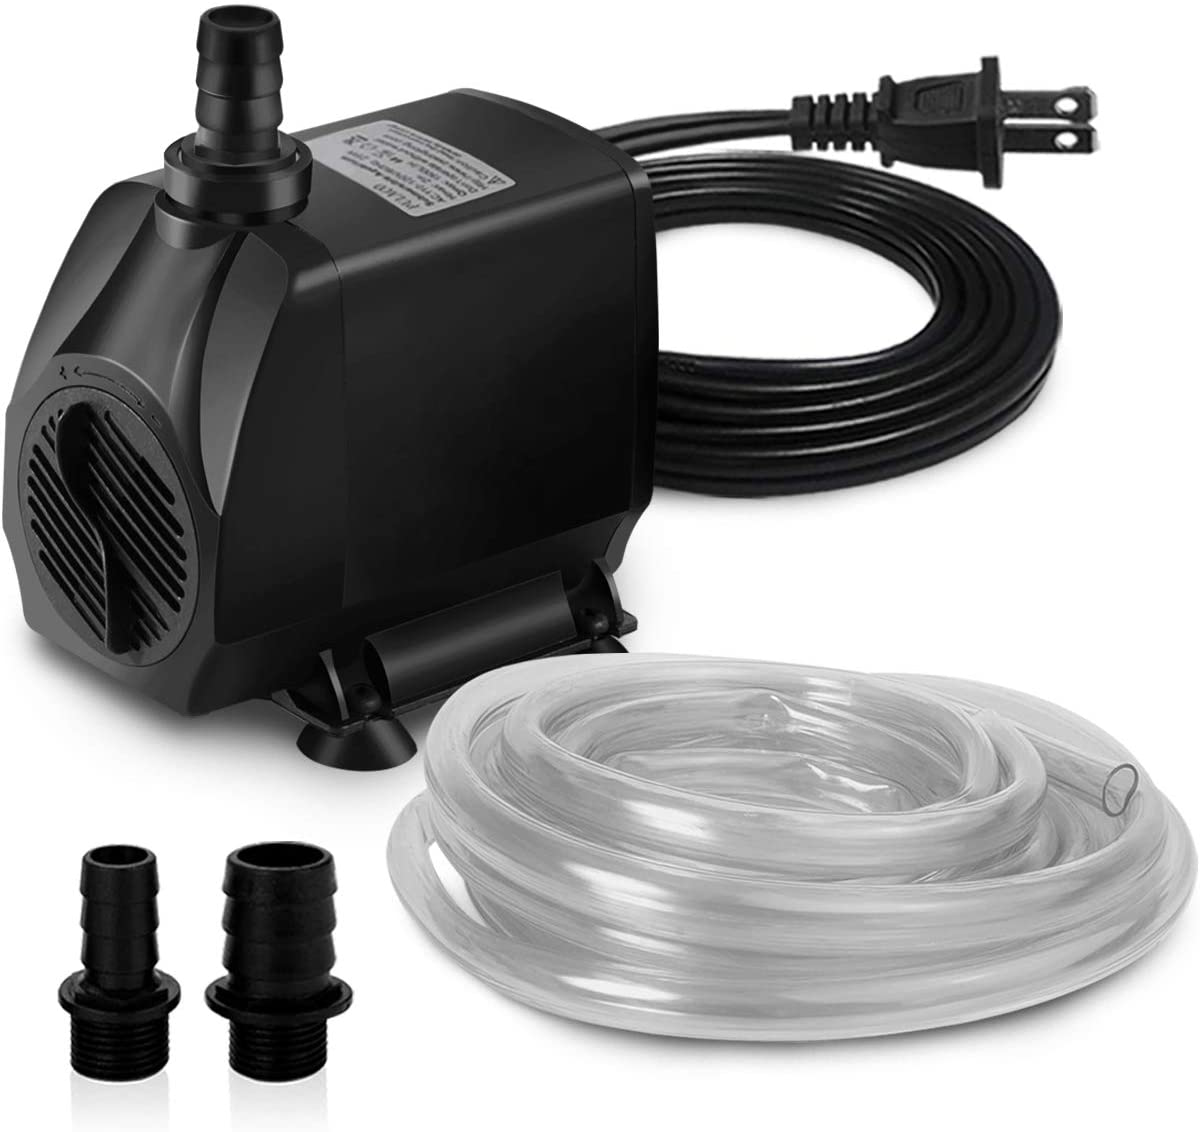 PULACO 1100GPH Submersible Water Pump (4200L/H 80W) 10 Ft Power Cord with 6.5 Ft Tubing for Pond, Fountain, Aquariums, Fish Tank, Hydroponics Animals & Pet Supplies > Pet Supplies > Fish Supplies > Aquarium & Pond Tubing PULACO   